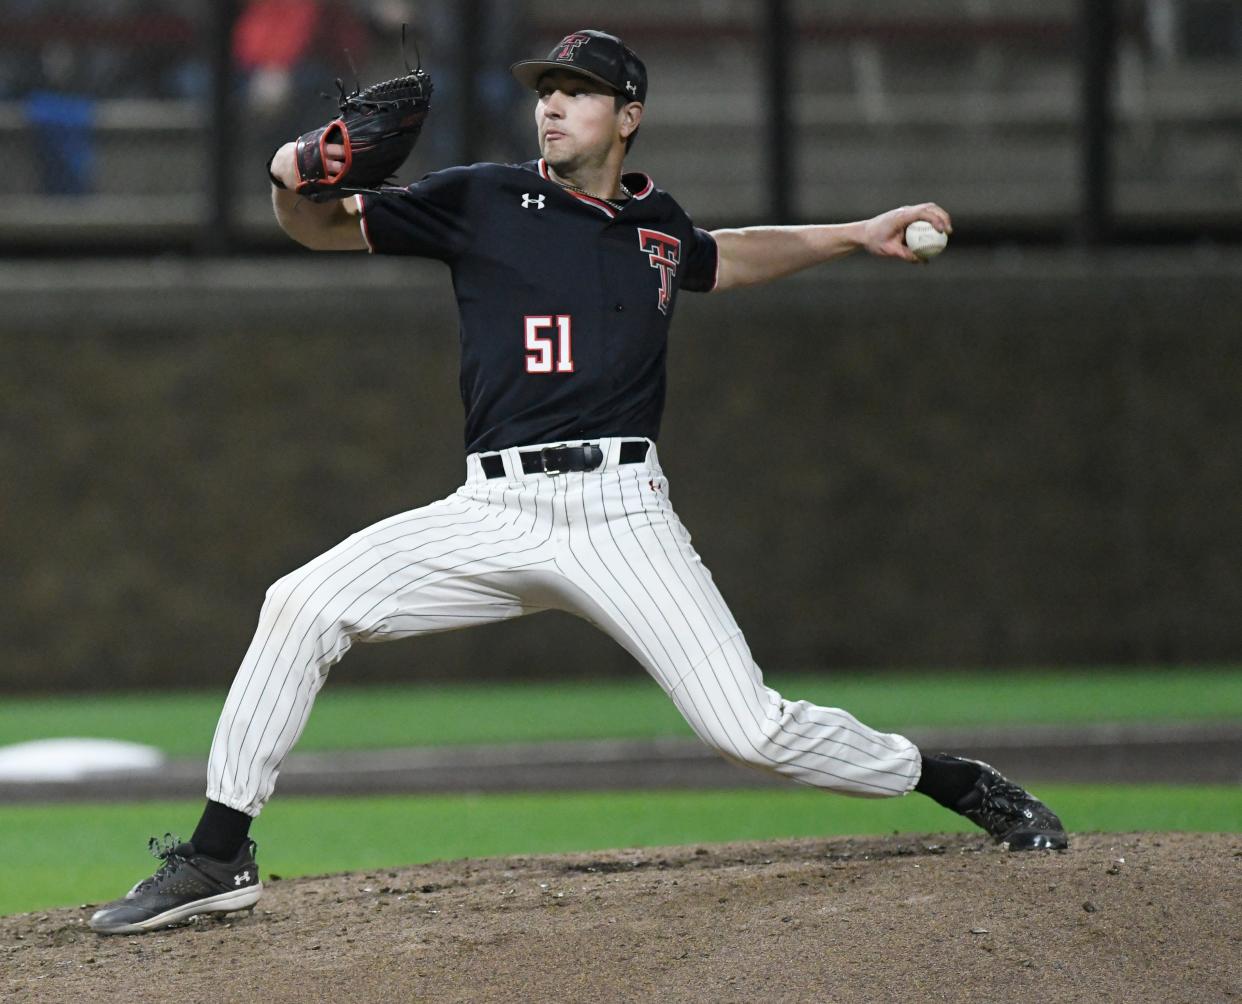 Texas Tech pitcher Zach Erdman (51) delivers during a midweek game this season against Air Force. The Red Raiders host Grand Canyon in a two-game series at 6:30 p.m. Tuesday and noon Wednesday.